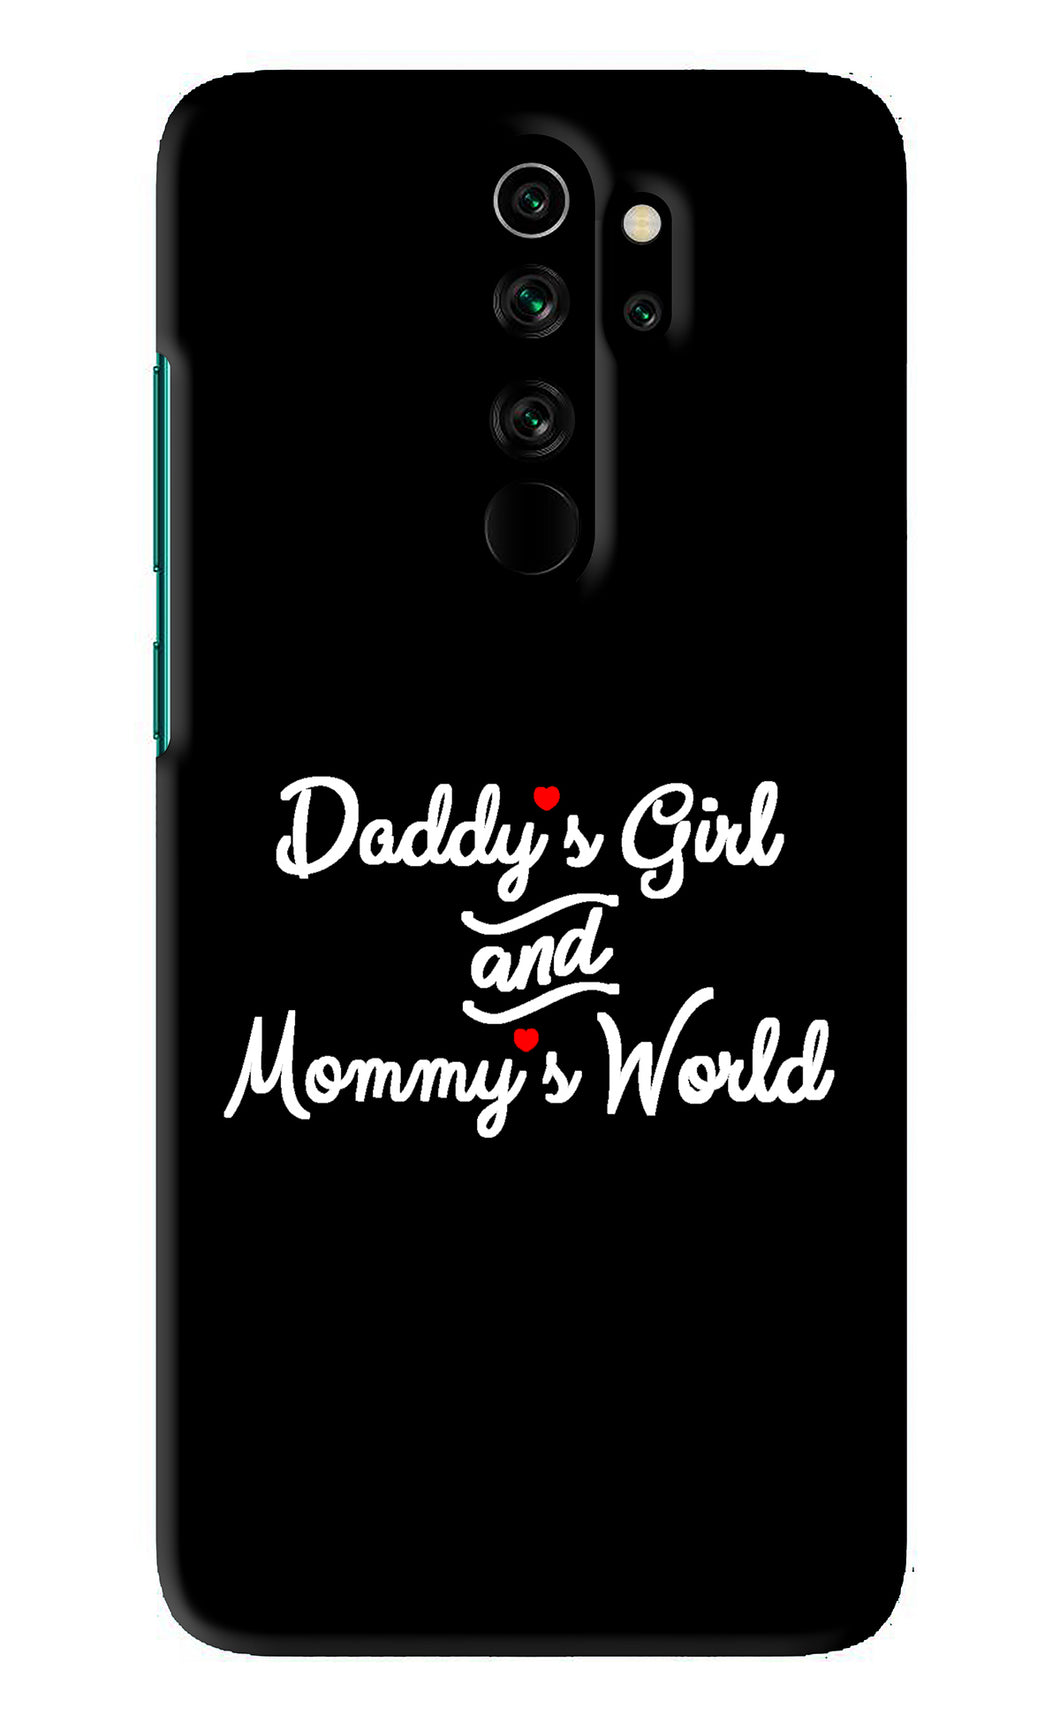 Daddy's Girl and Mommy's World Xiaomi Redmi Note 8 Pro Back Skin Wrap